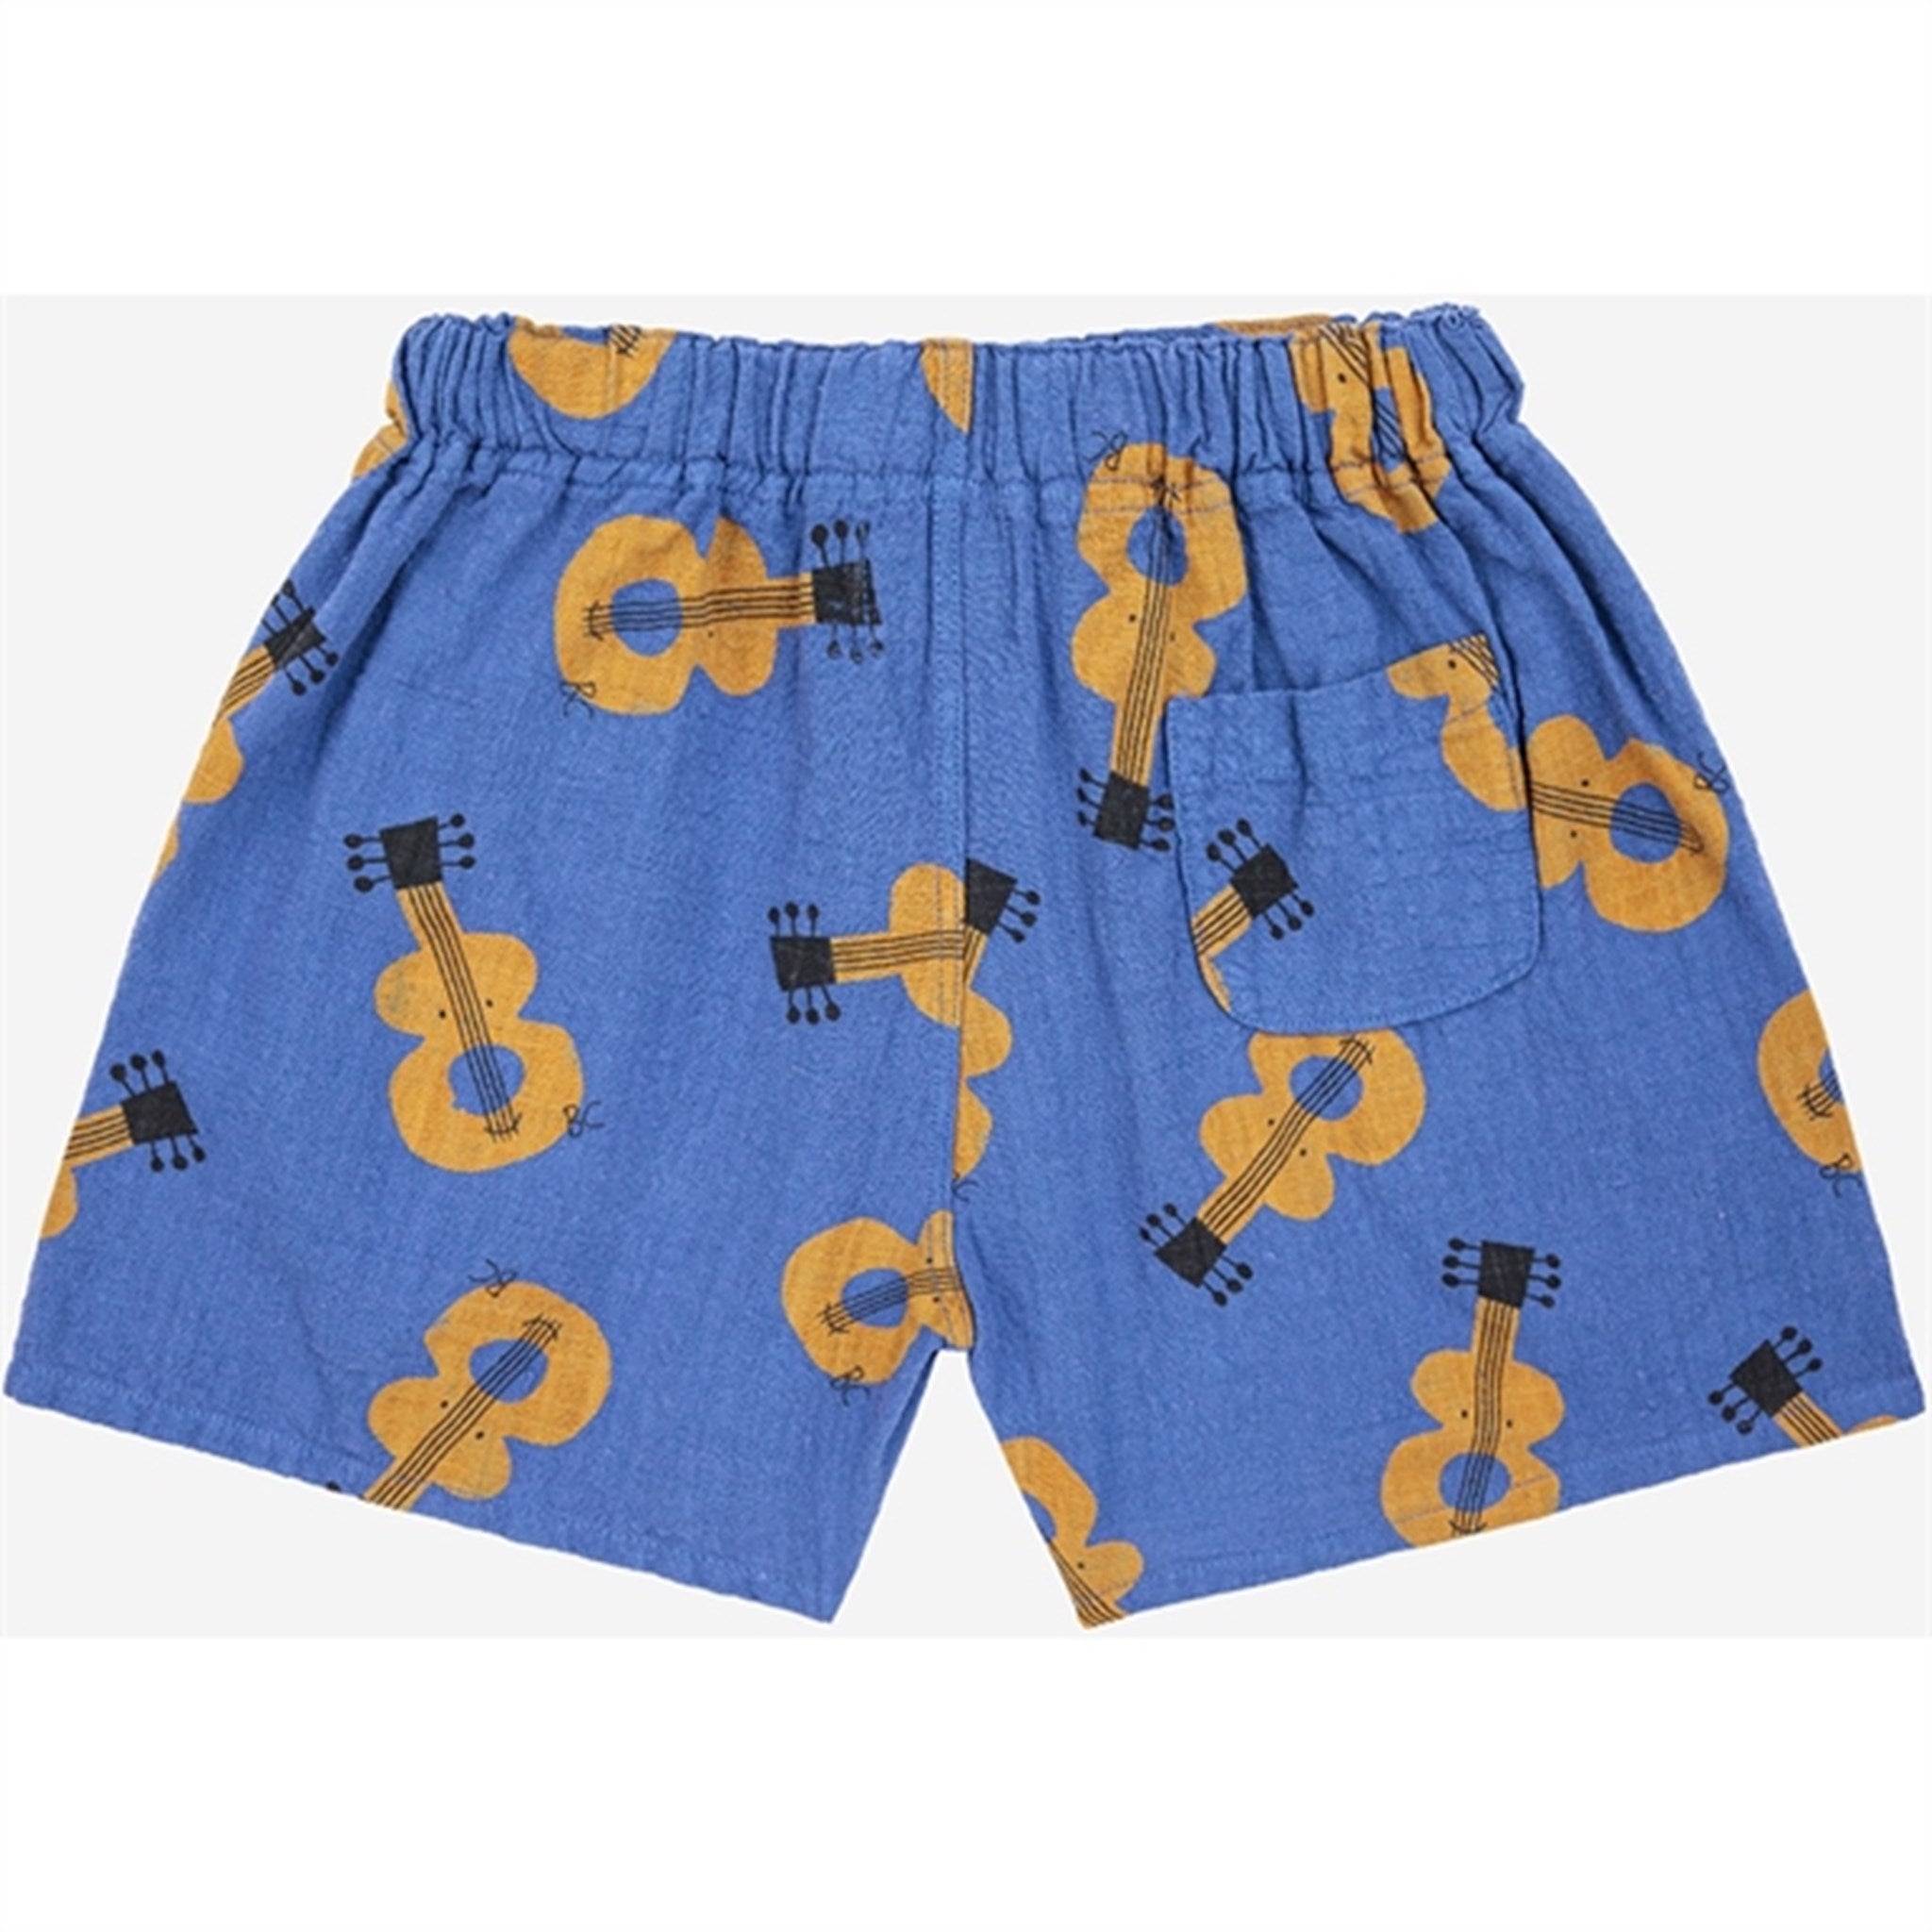 Bobo Choses Acoustic Guitar All Over Woven Shorts Navy Blue 2